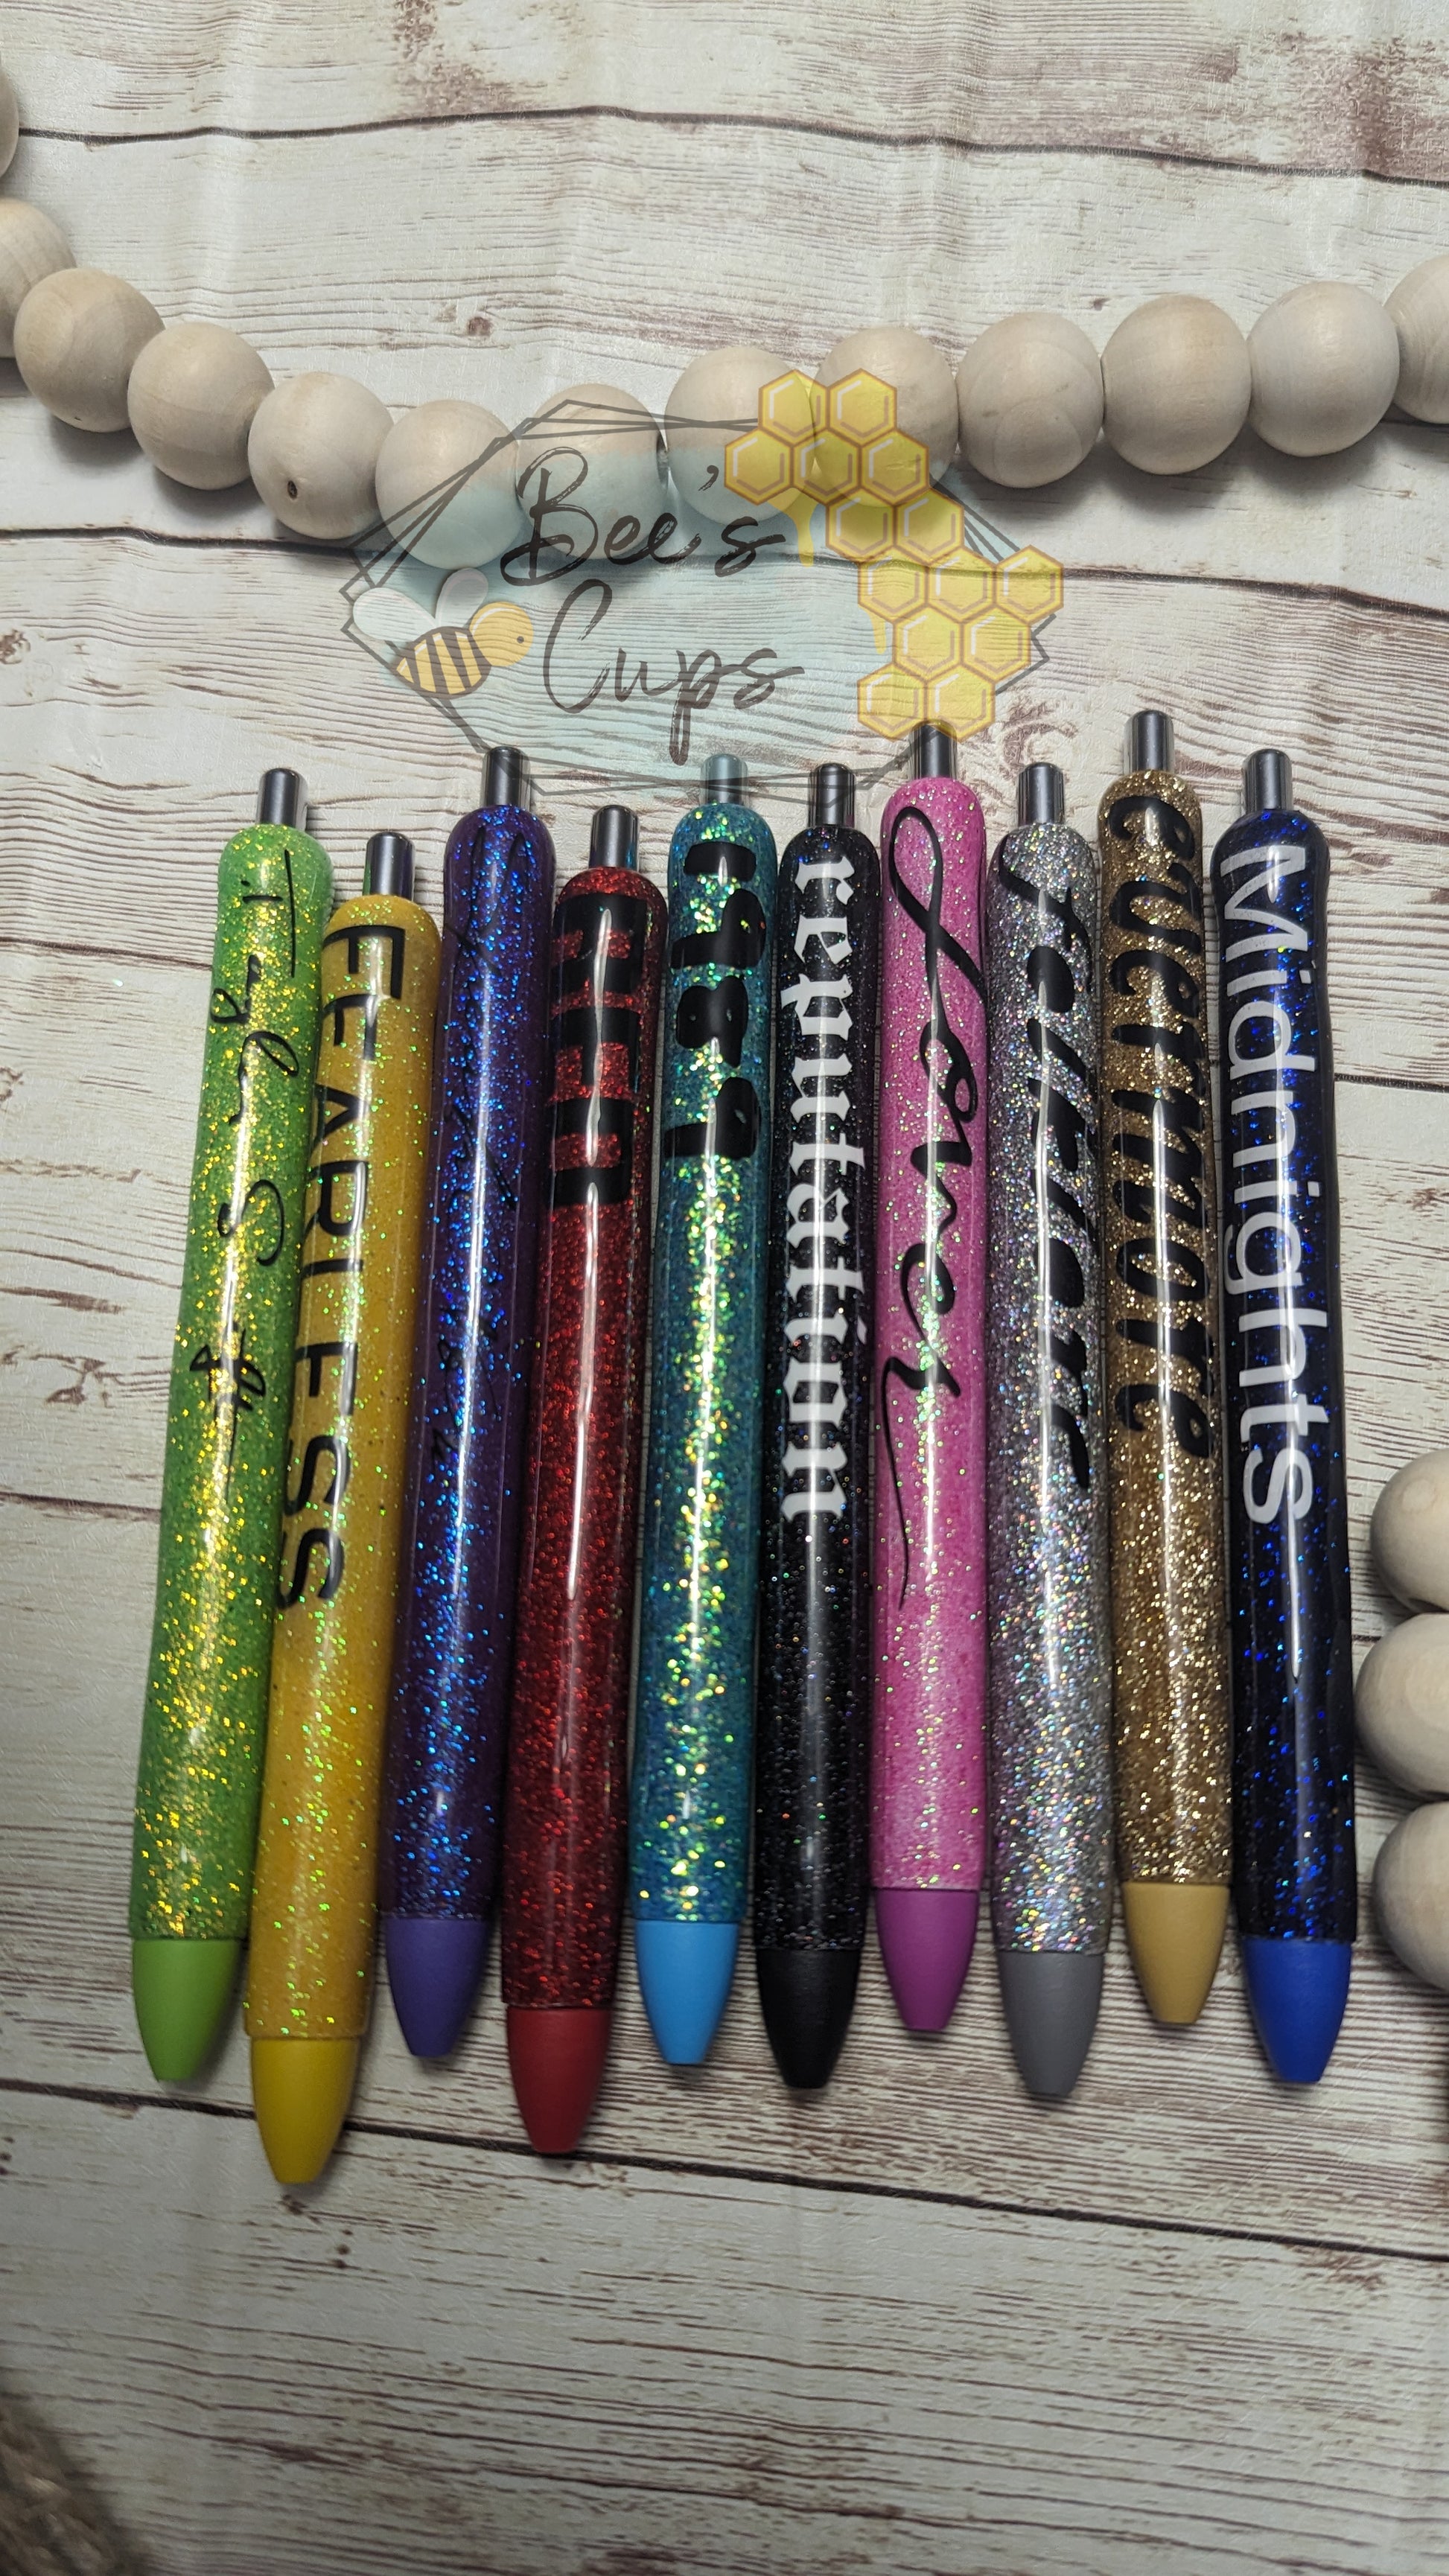 TAYLOR SWIFT Glitter Pen, Stocking Stuffers, Gifts for Coworkers